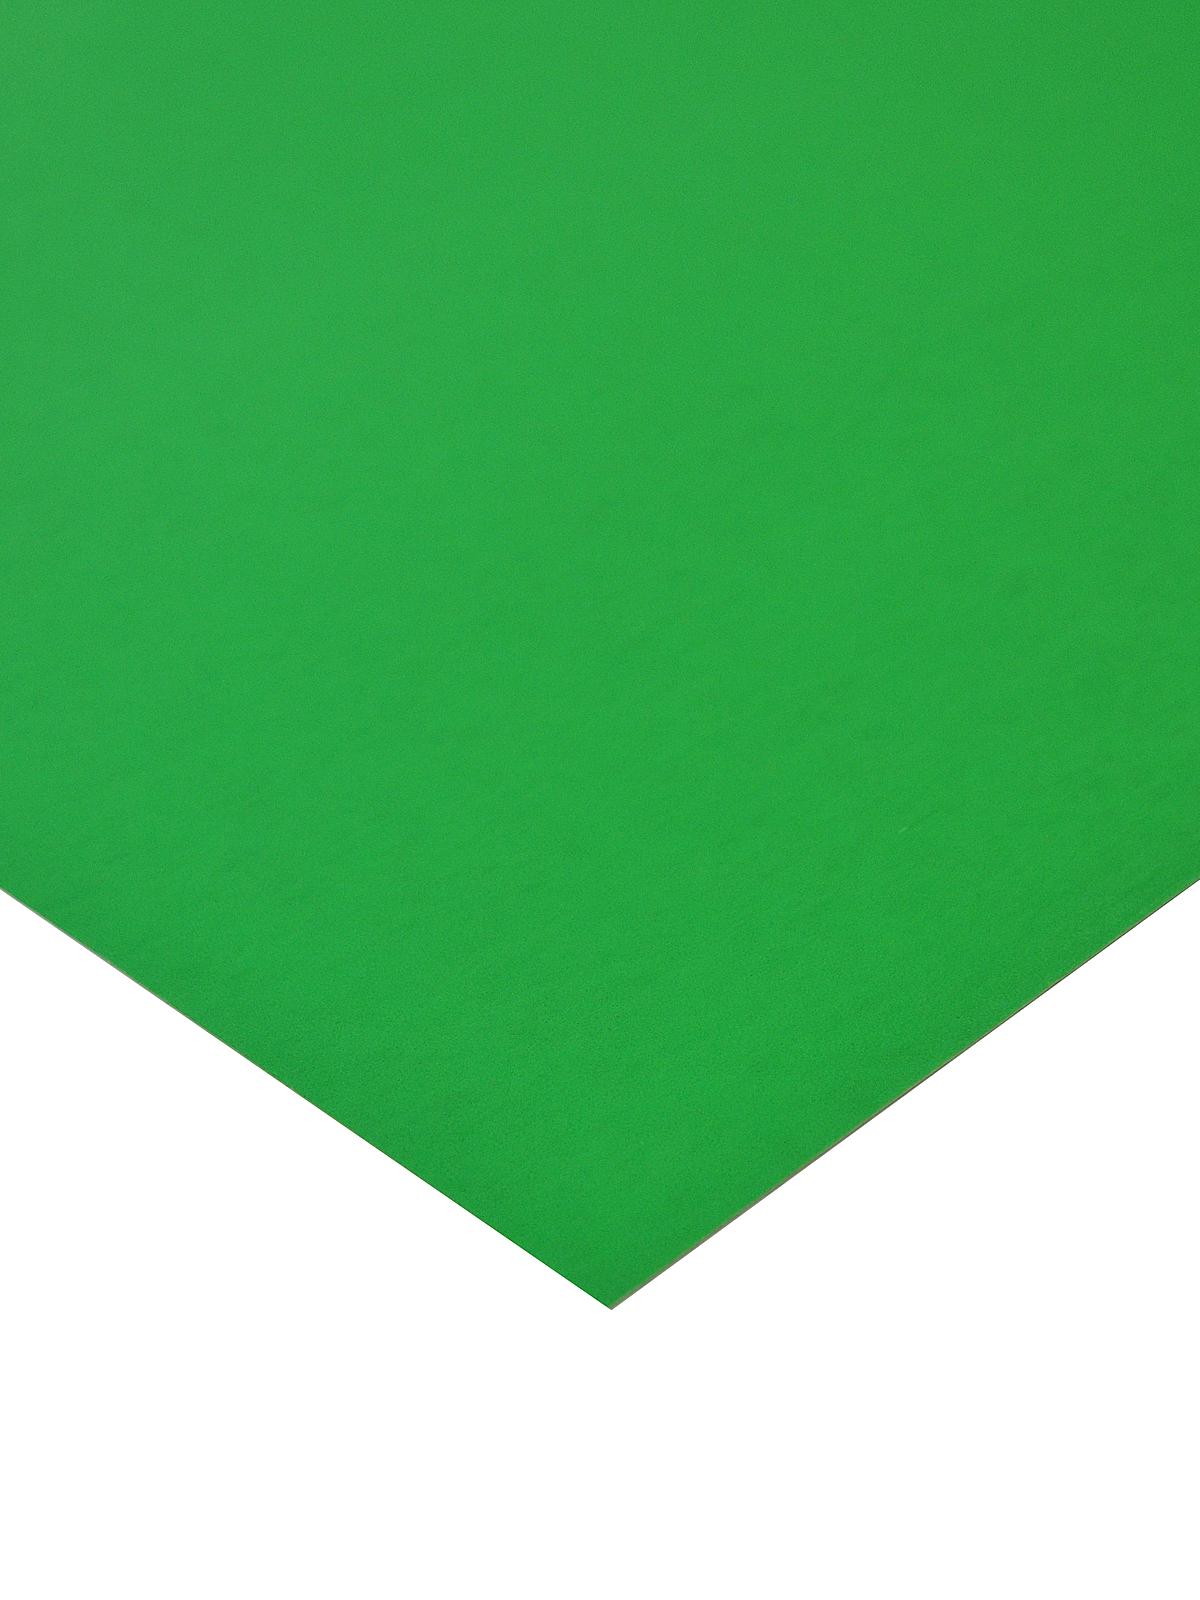 The Heavy Poster Board Green